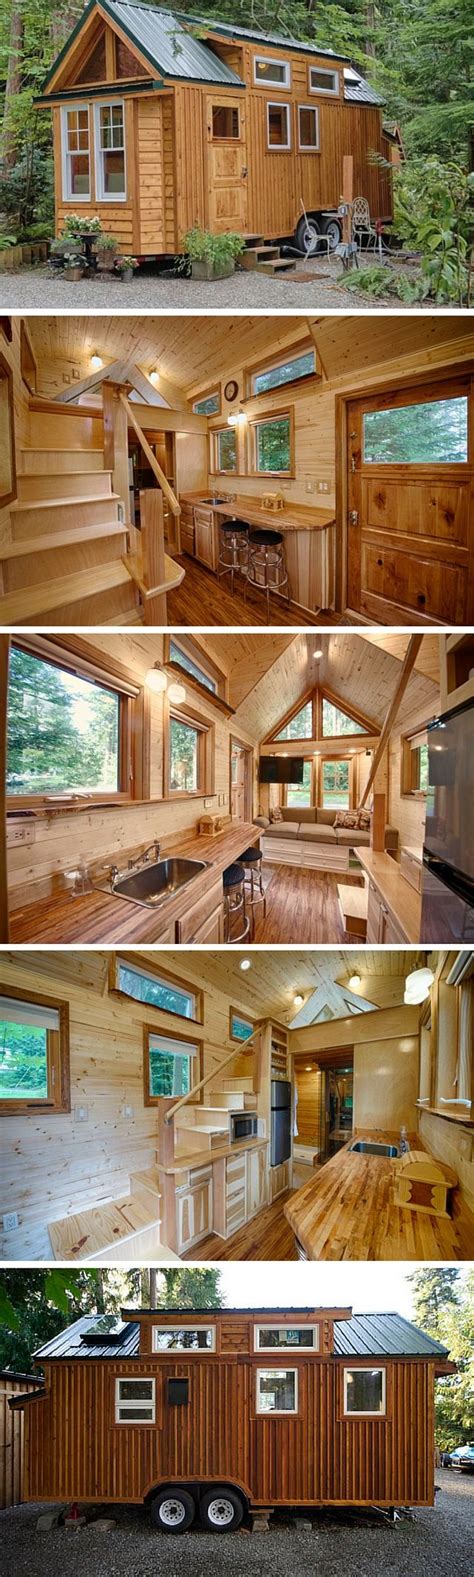 The Hope Island Cottage A 170 Sq Ft Tiny House On Wheels Theres